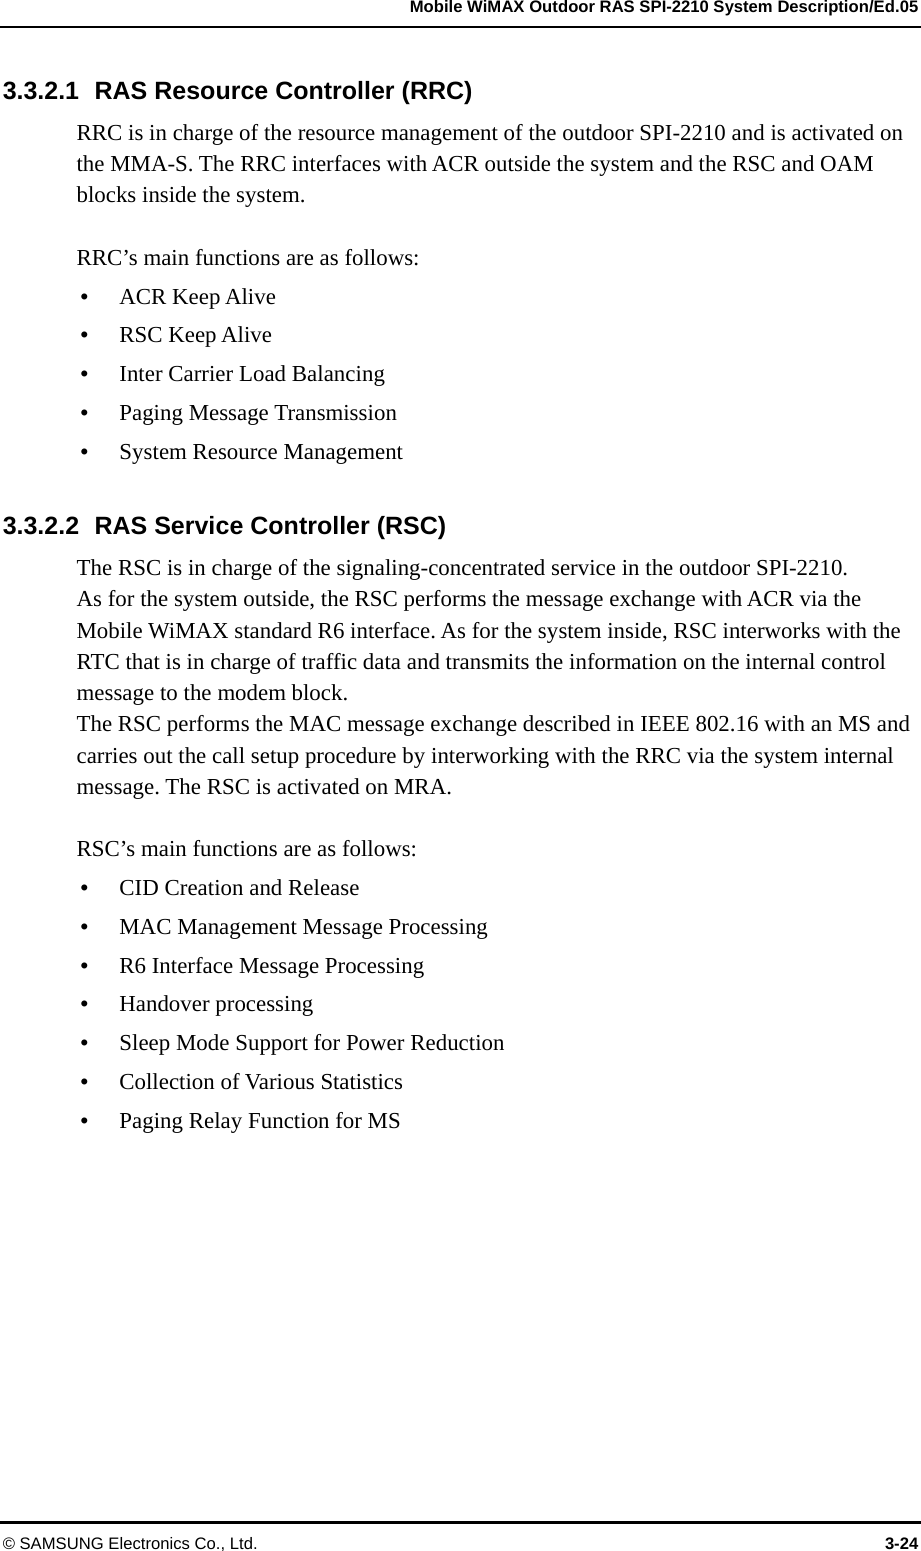   Mobile WiMAX Outdoor RAS SPI-2210 System Description/Ed.05 © SAMSUNG Electronics Co., Ltd.  3-24 3.3.2.1  RAS Resource Controller (RRC) RRC is in charge of the resource management of the outdoor SPI-2210 and is activated on the MMA-S. The RRC interfaces with ACR outside the system and the RSC and OAM blocks inside the system.  RRC’s main functions are as follows:    ACR Keep Alive  RSC Keep Alive  Inter Carrier Load Balancing  Paging Message Transmission  System Resource Management  3.3.2.2  RAS Service Controller (RSC) The RSC is in charge of the signaling-concentrated service in the outdoor SPI-2210.   As for the system outside, the RSC performs the message exchange with ACR via the Mobile WiMAX standard R6 interface. As for the system inside, RSC interworks with the RTC that is in charge of traffic data and transmits the information on the internal control message to the modem block.   The RSC performs the MAC message exchange described in IEEE 802.16 with an MS and carries out the call setup procedure by interworking with the RRC via the system internal message. The RSC is activated on MRA.  RSC’s main functions are as follows:  CID Creation and Release  MAC Management Message Processing  R6 Interface Message Processing    Handover processing  Sleep Mode Support for Power Reduction  Collection of Various Statistics    Paging Relay Function for MS  